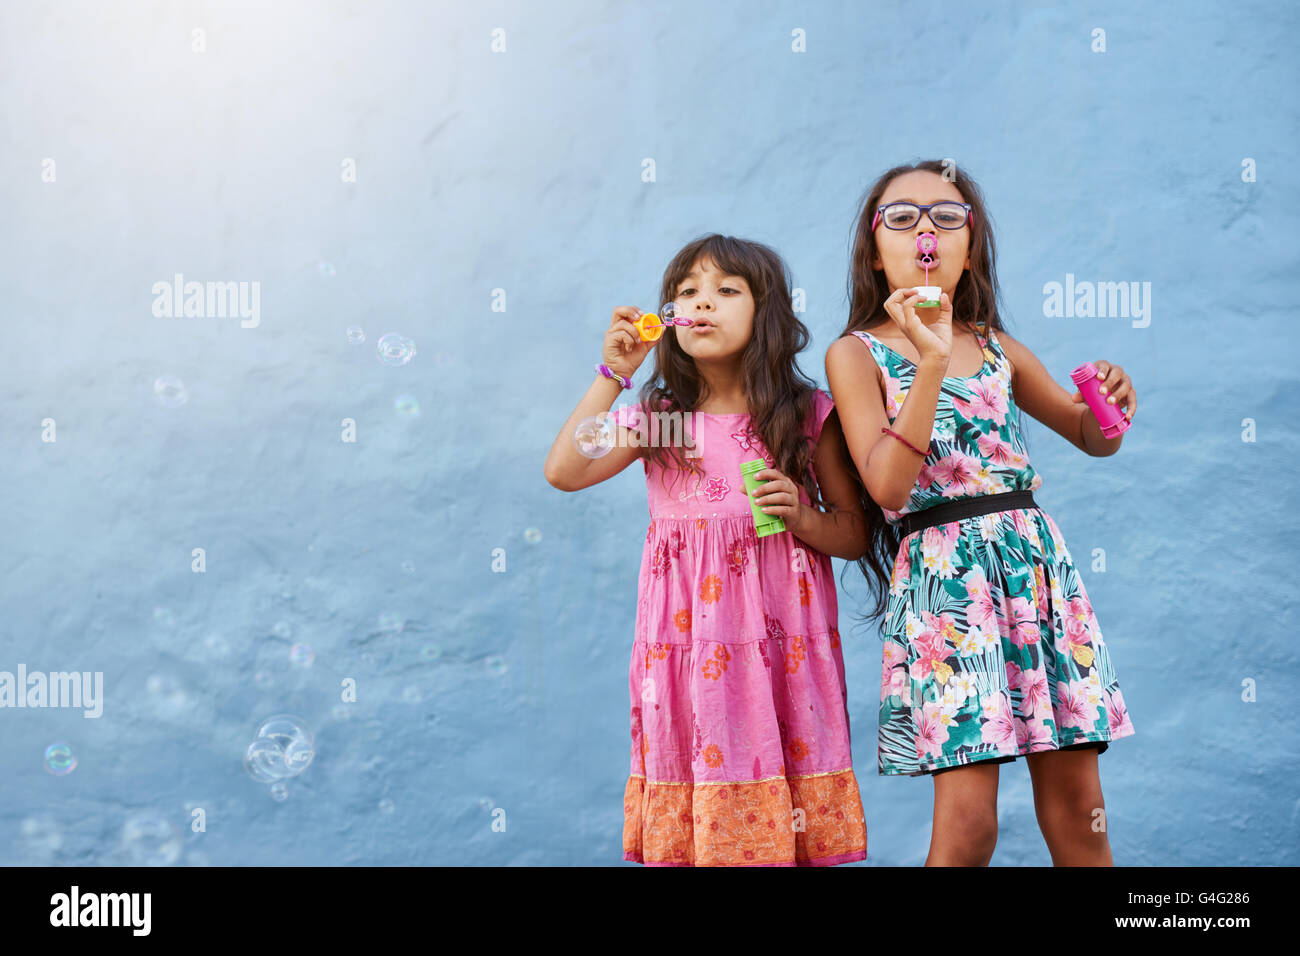 Portrait of adorable little girls blowing soap bubbles against blue wall. Two young girls playing together. Stock Photo